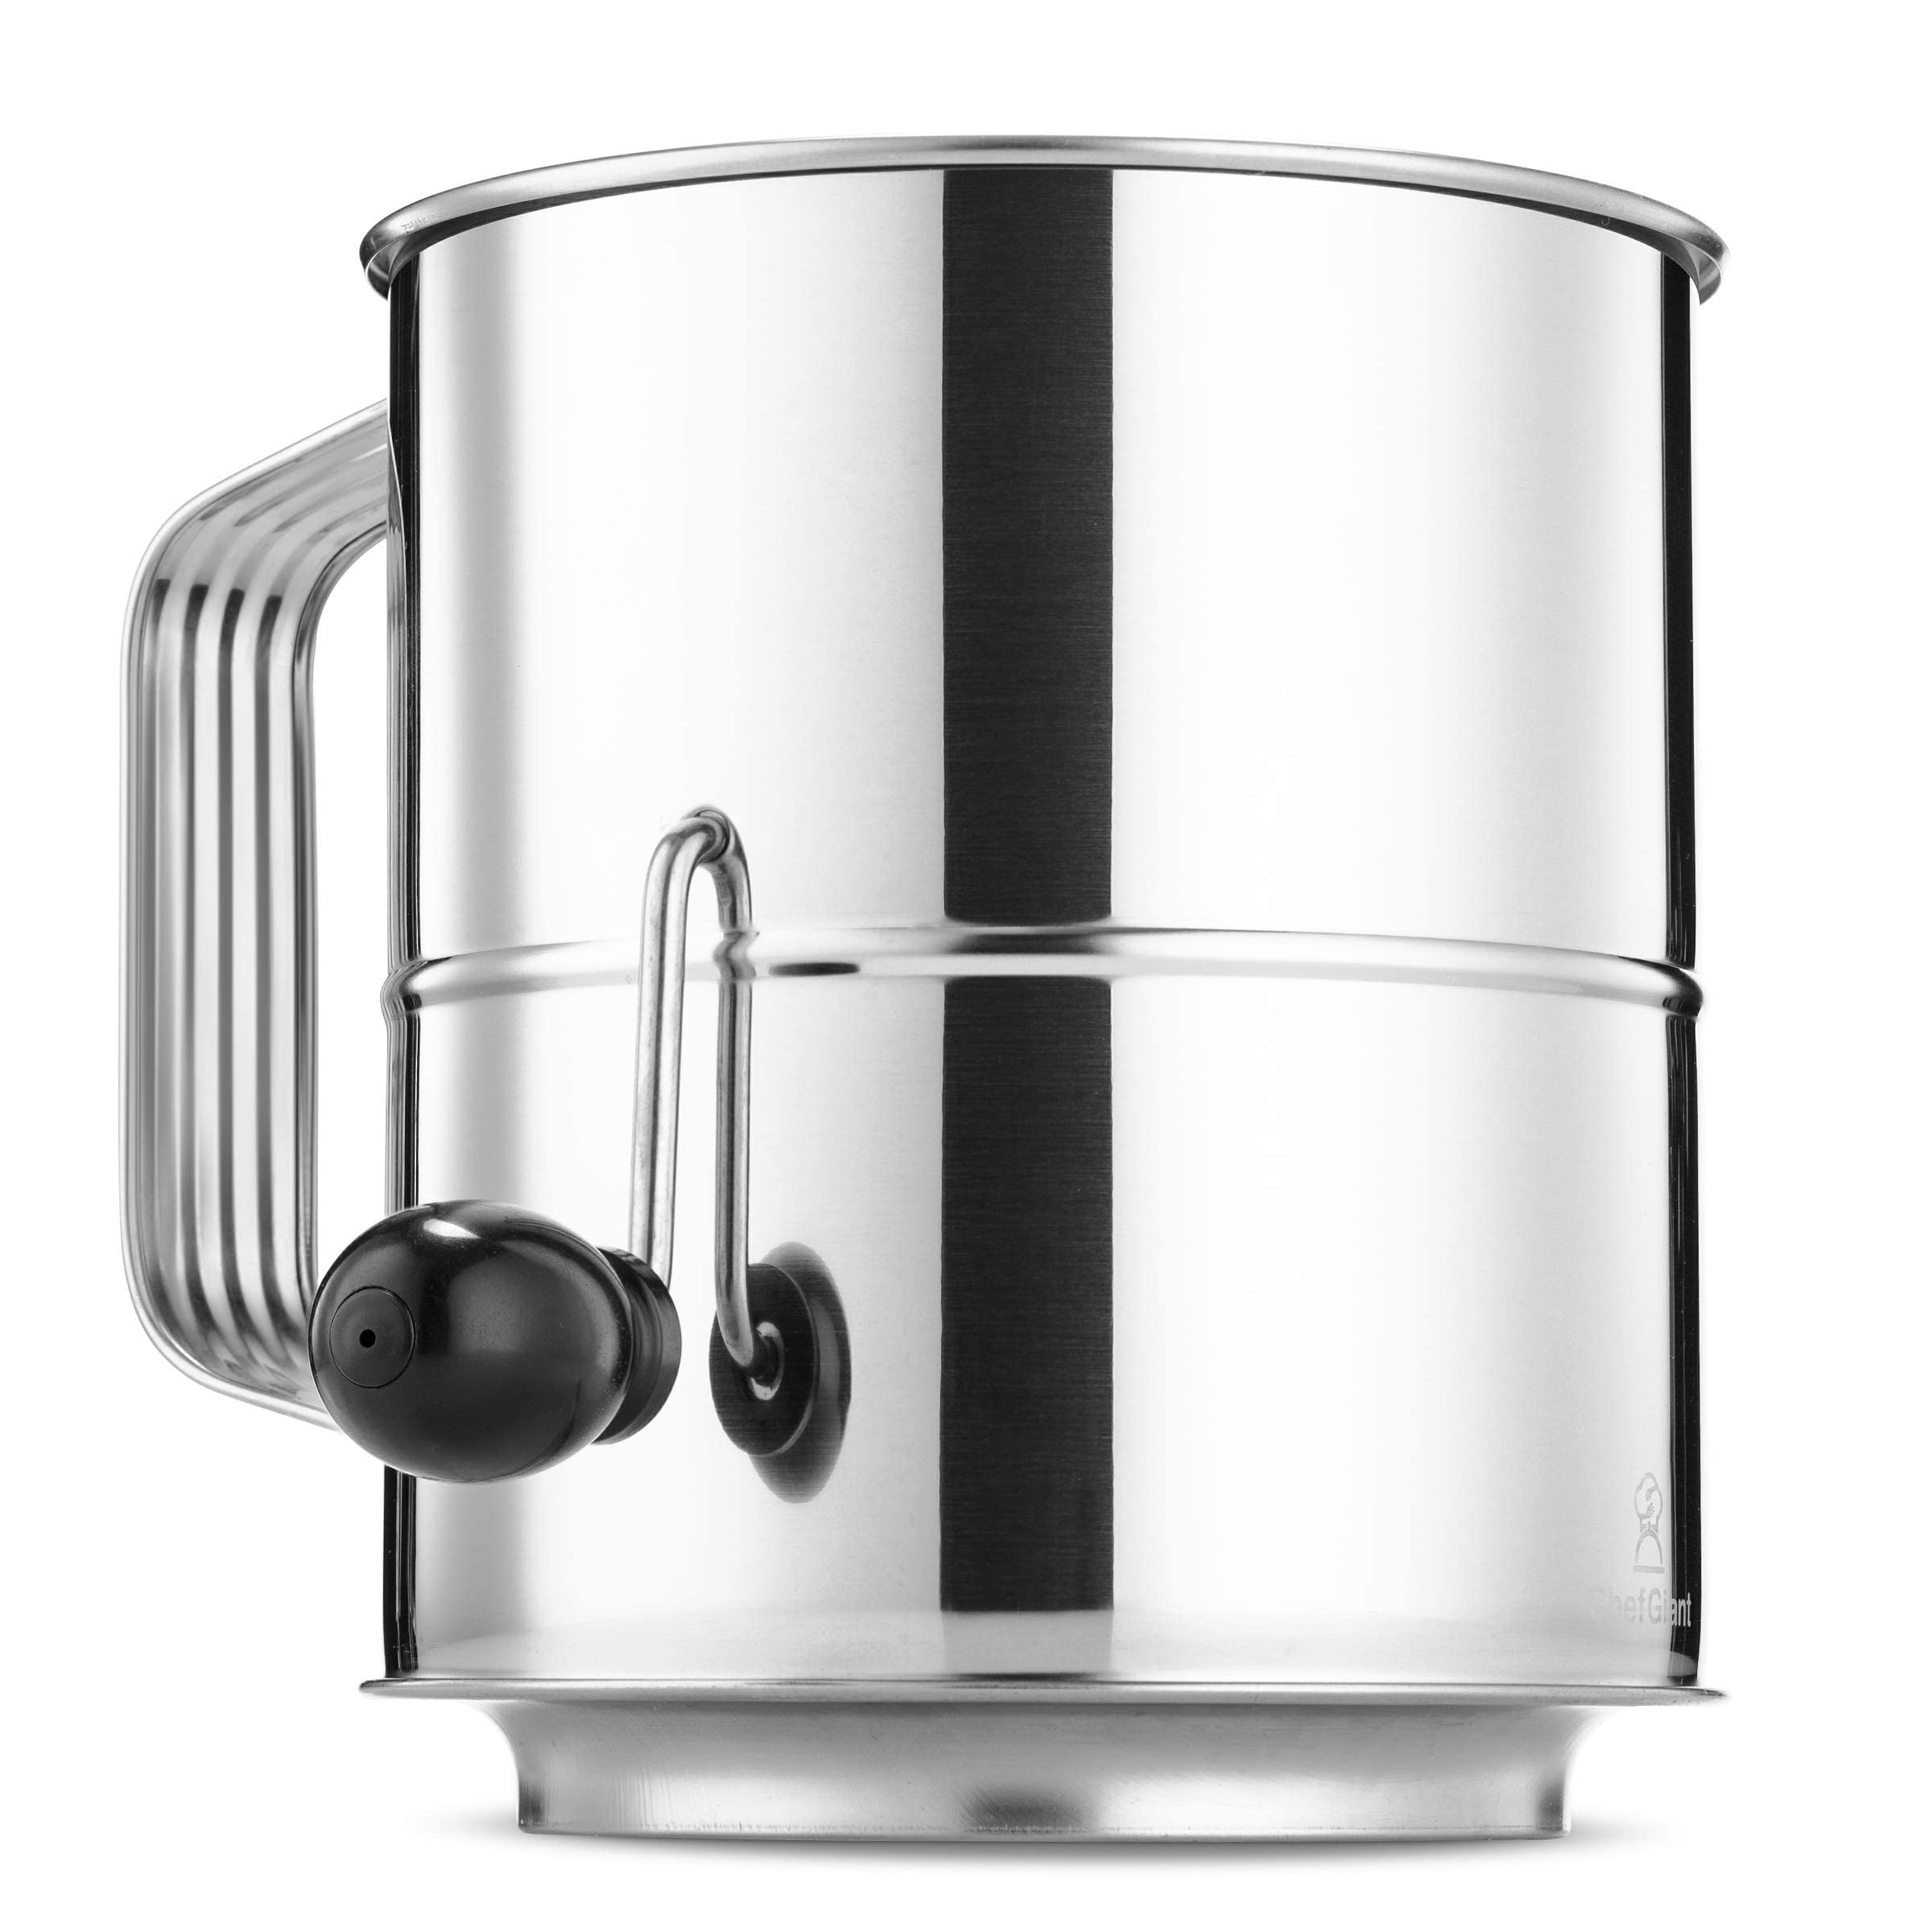 chefgiant Flour Sifter 8 cup Stainless Steel Rotary Hand crank, Baking Sugar Sifter with 16 Fine Mesh Screen, corrosion Resistan